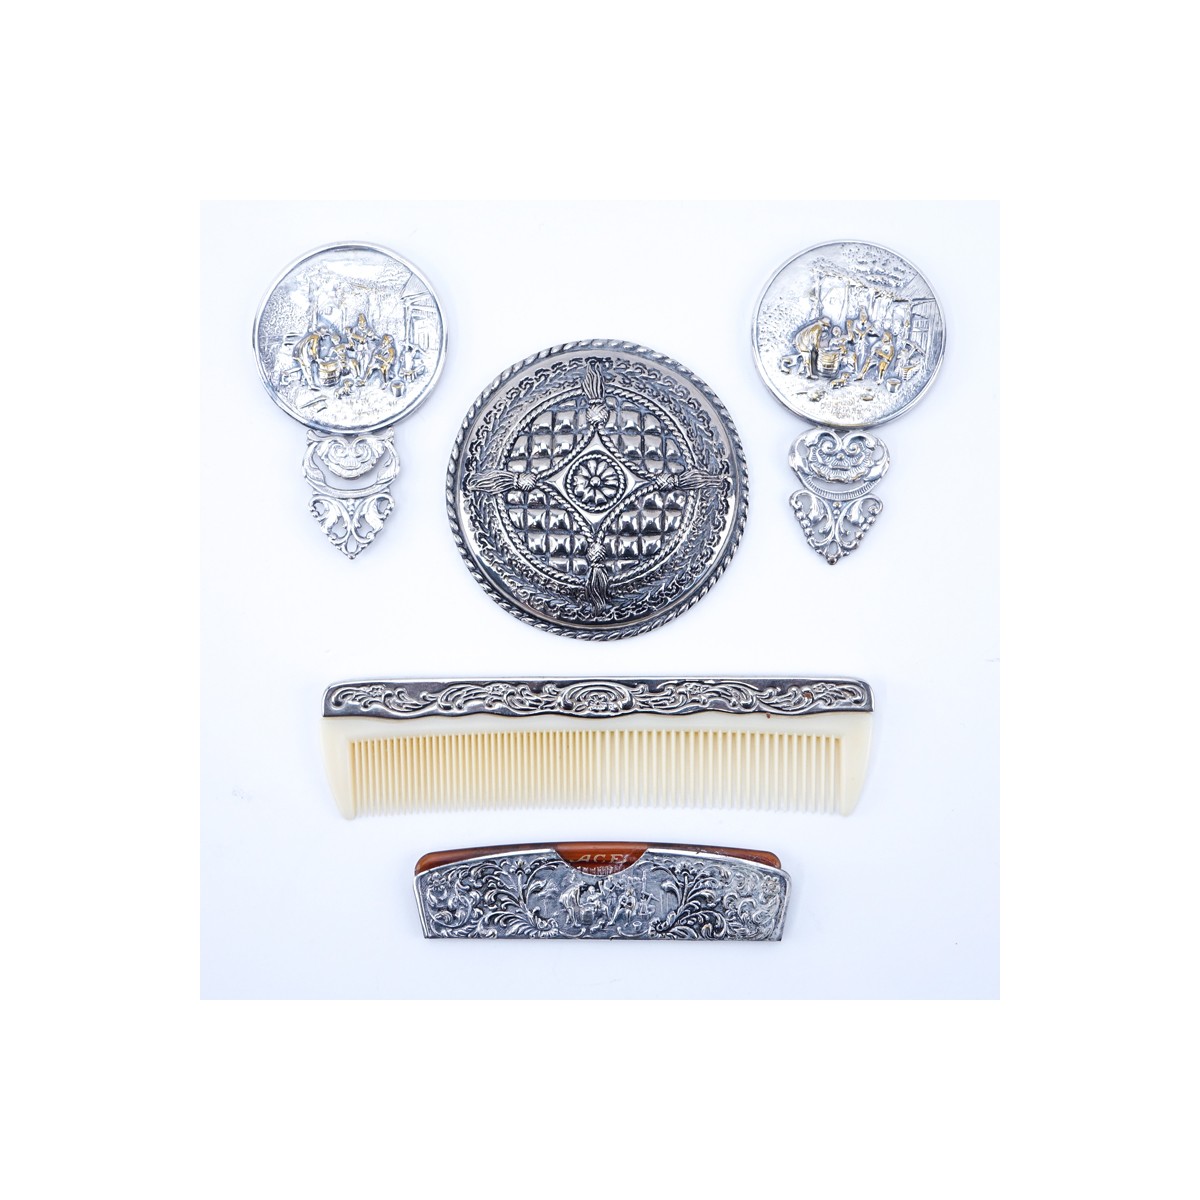 Collection of Five (5) Repousse Silver Plated Vanity Items. Includes: two combs and three mirrors.